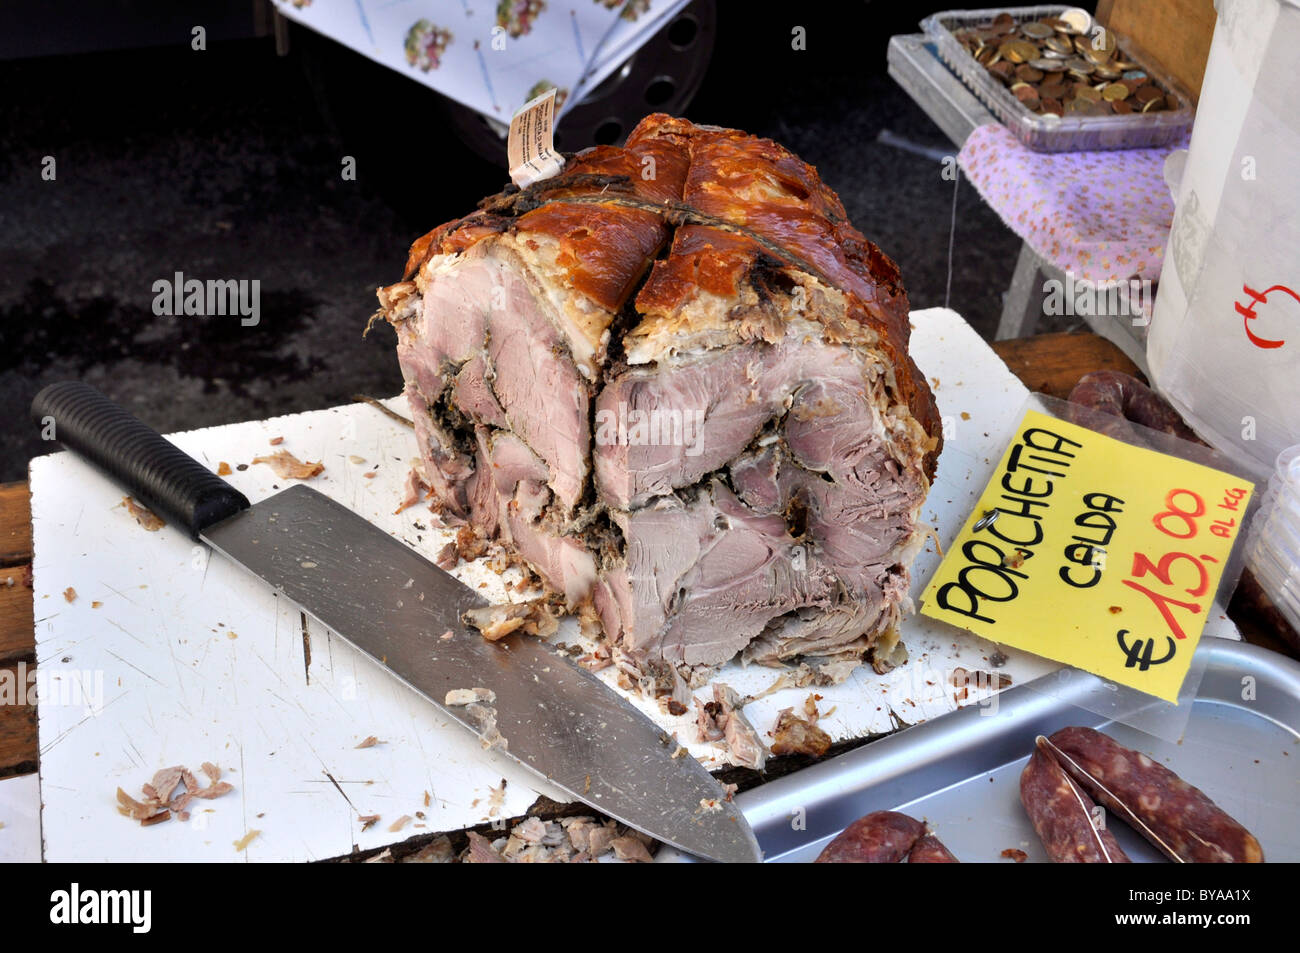 Food stand with the Porchetta pork specialty, weekly market, Rome, Lazio, Italy, Europe Stock Photo